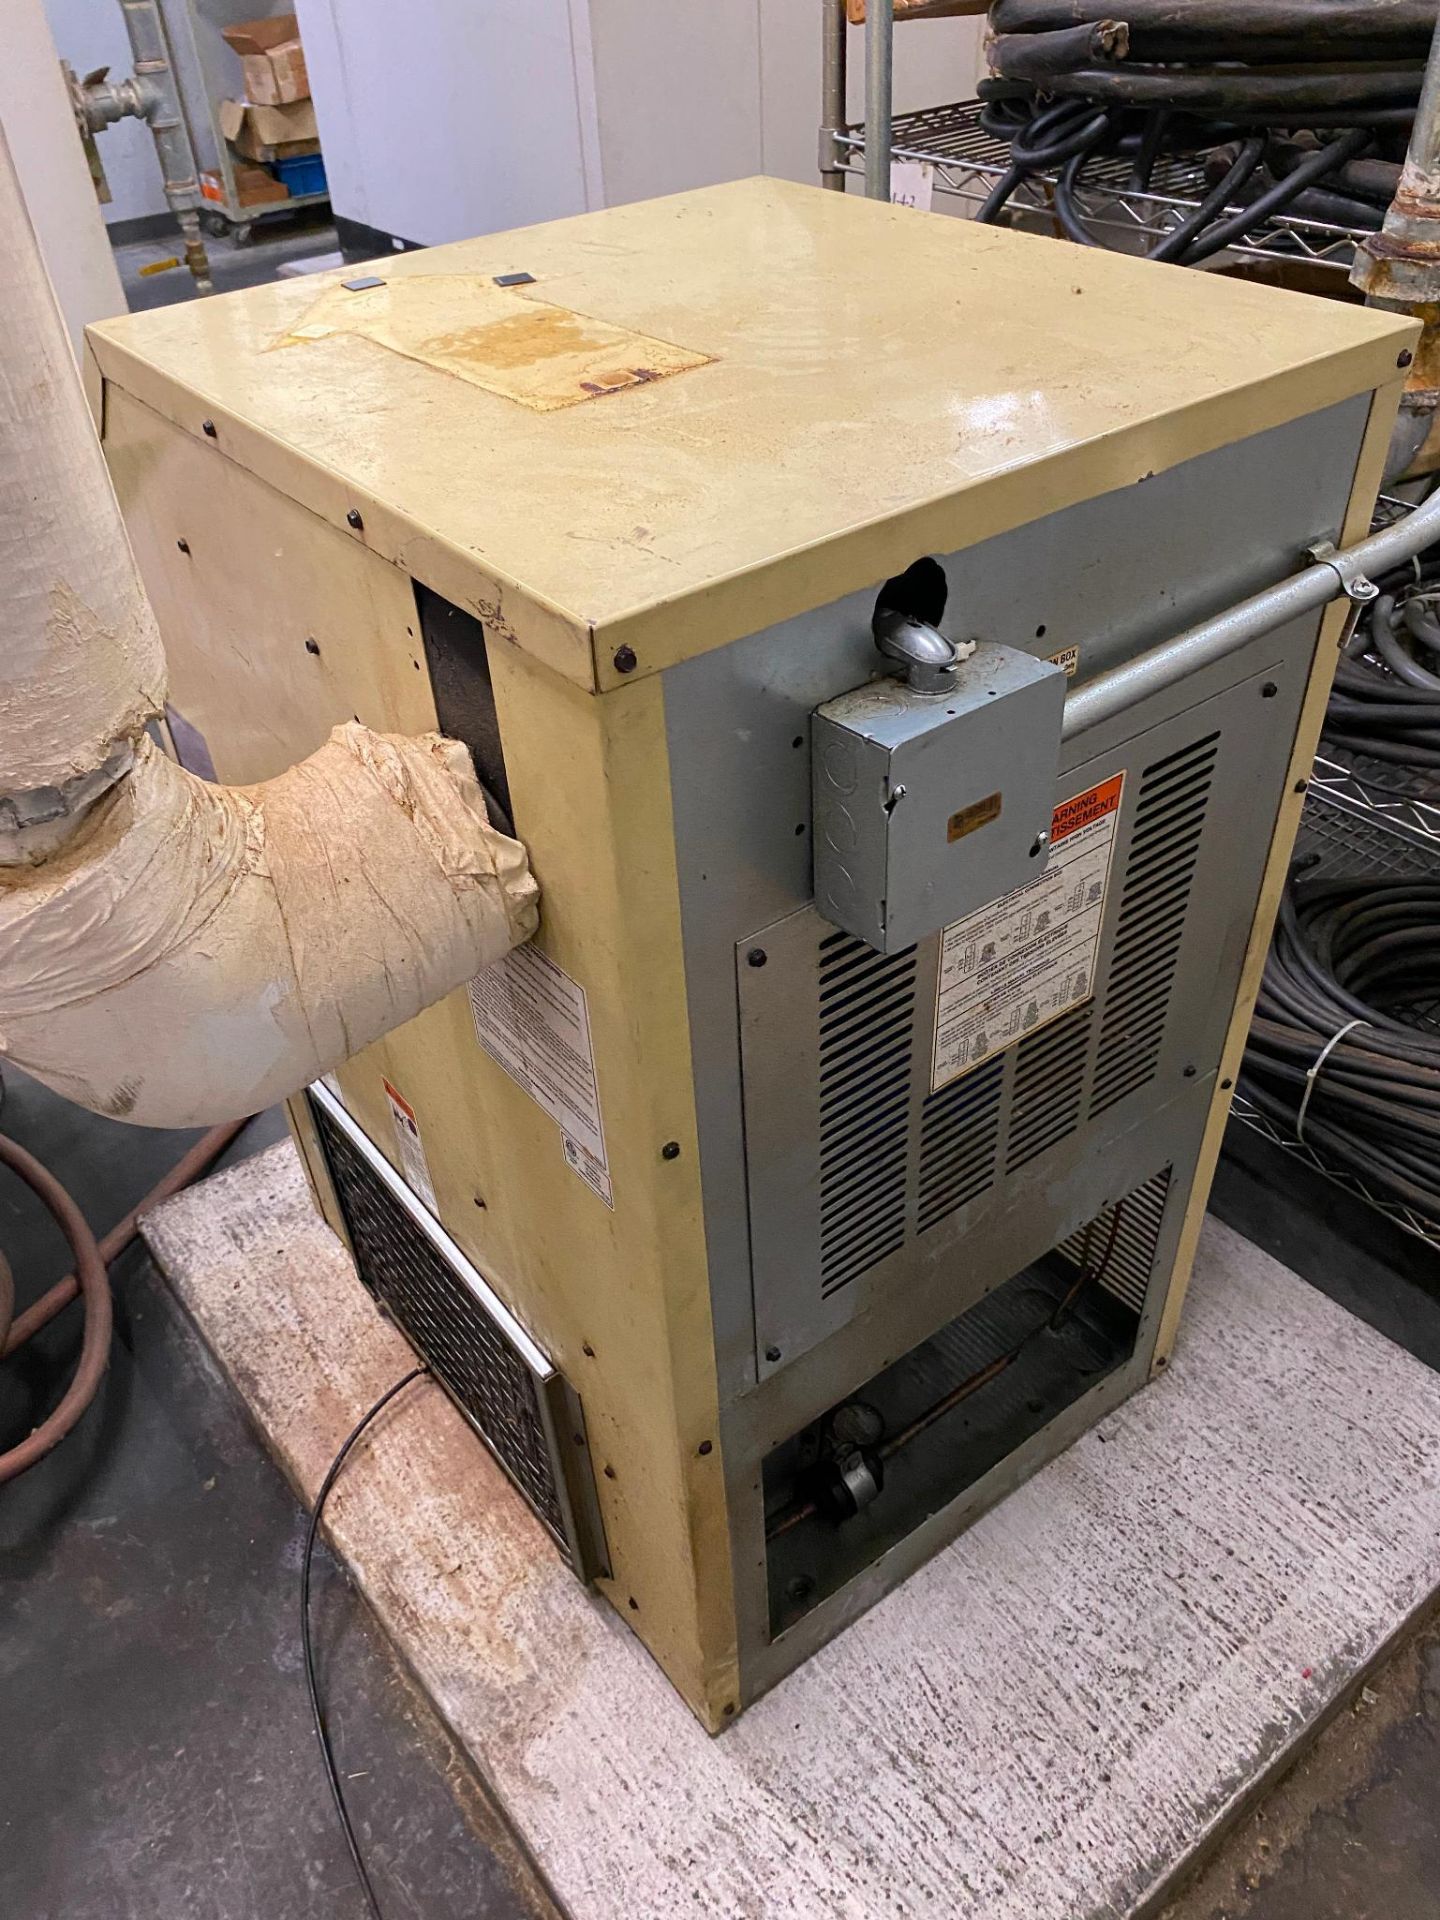 AIR DRYER, INGERSOLL-RAND MDL. D680iNA400, 460 v., 300 psi max. pressure, S/N WCH1017385 - Image 2 of 2